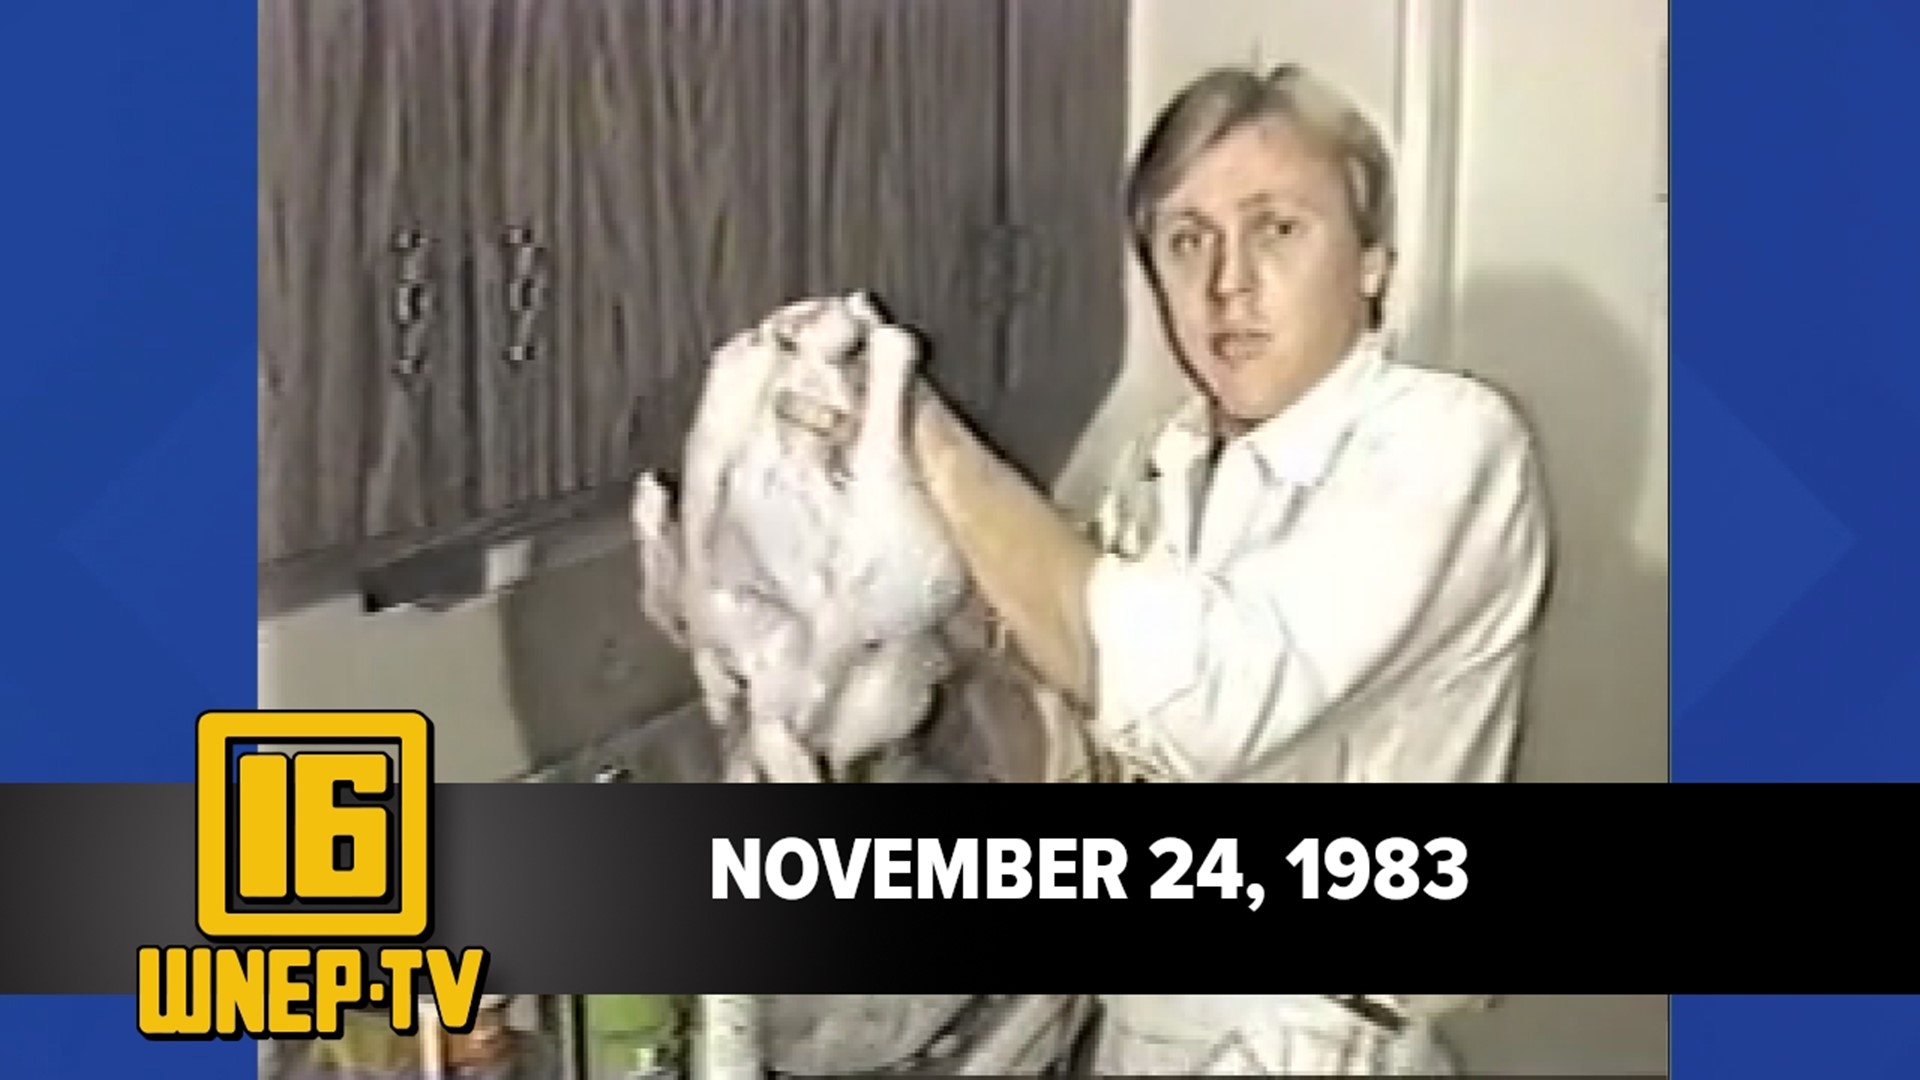 Join Karen Harch and Nolan Johannes for curated stories from November 24, 1983.